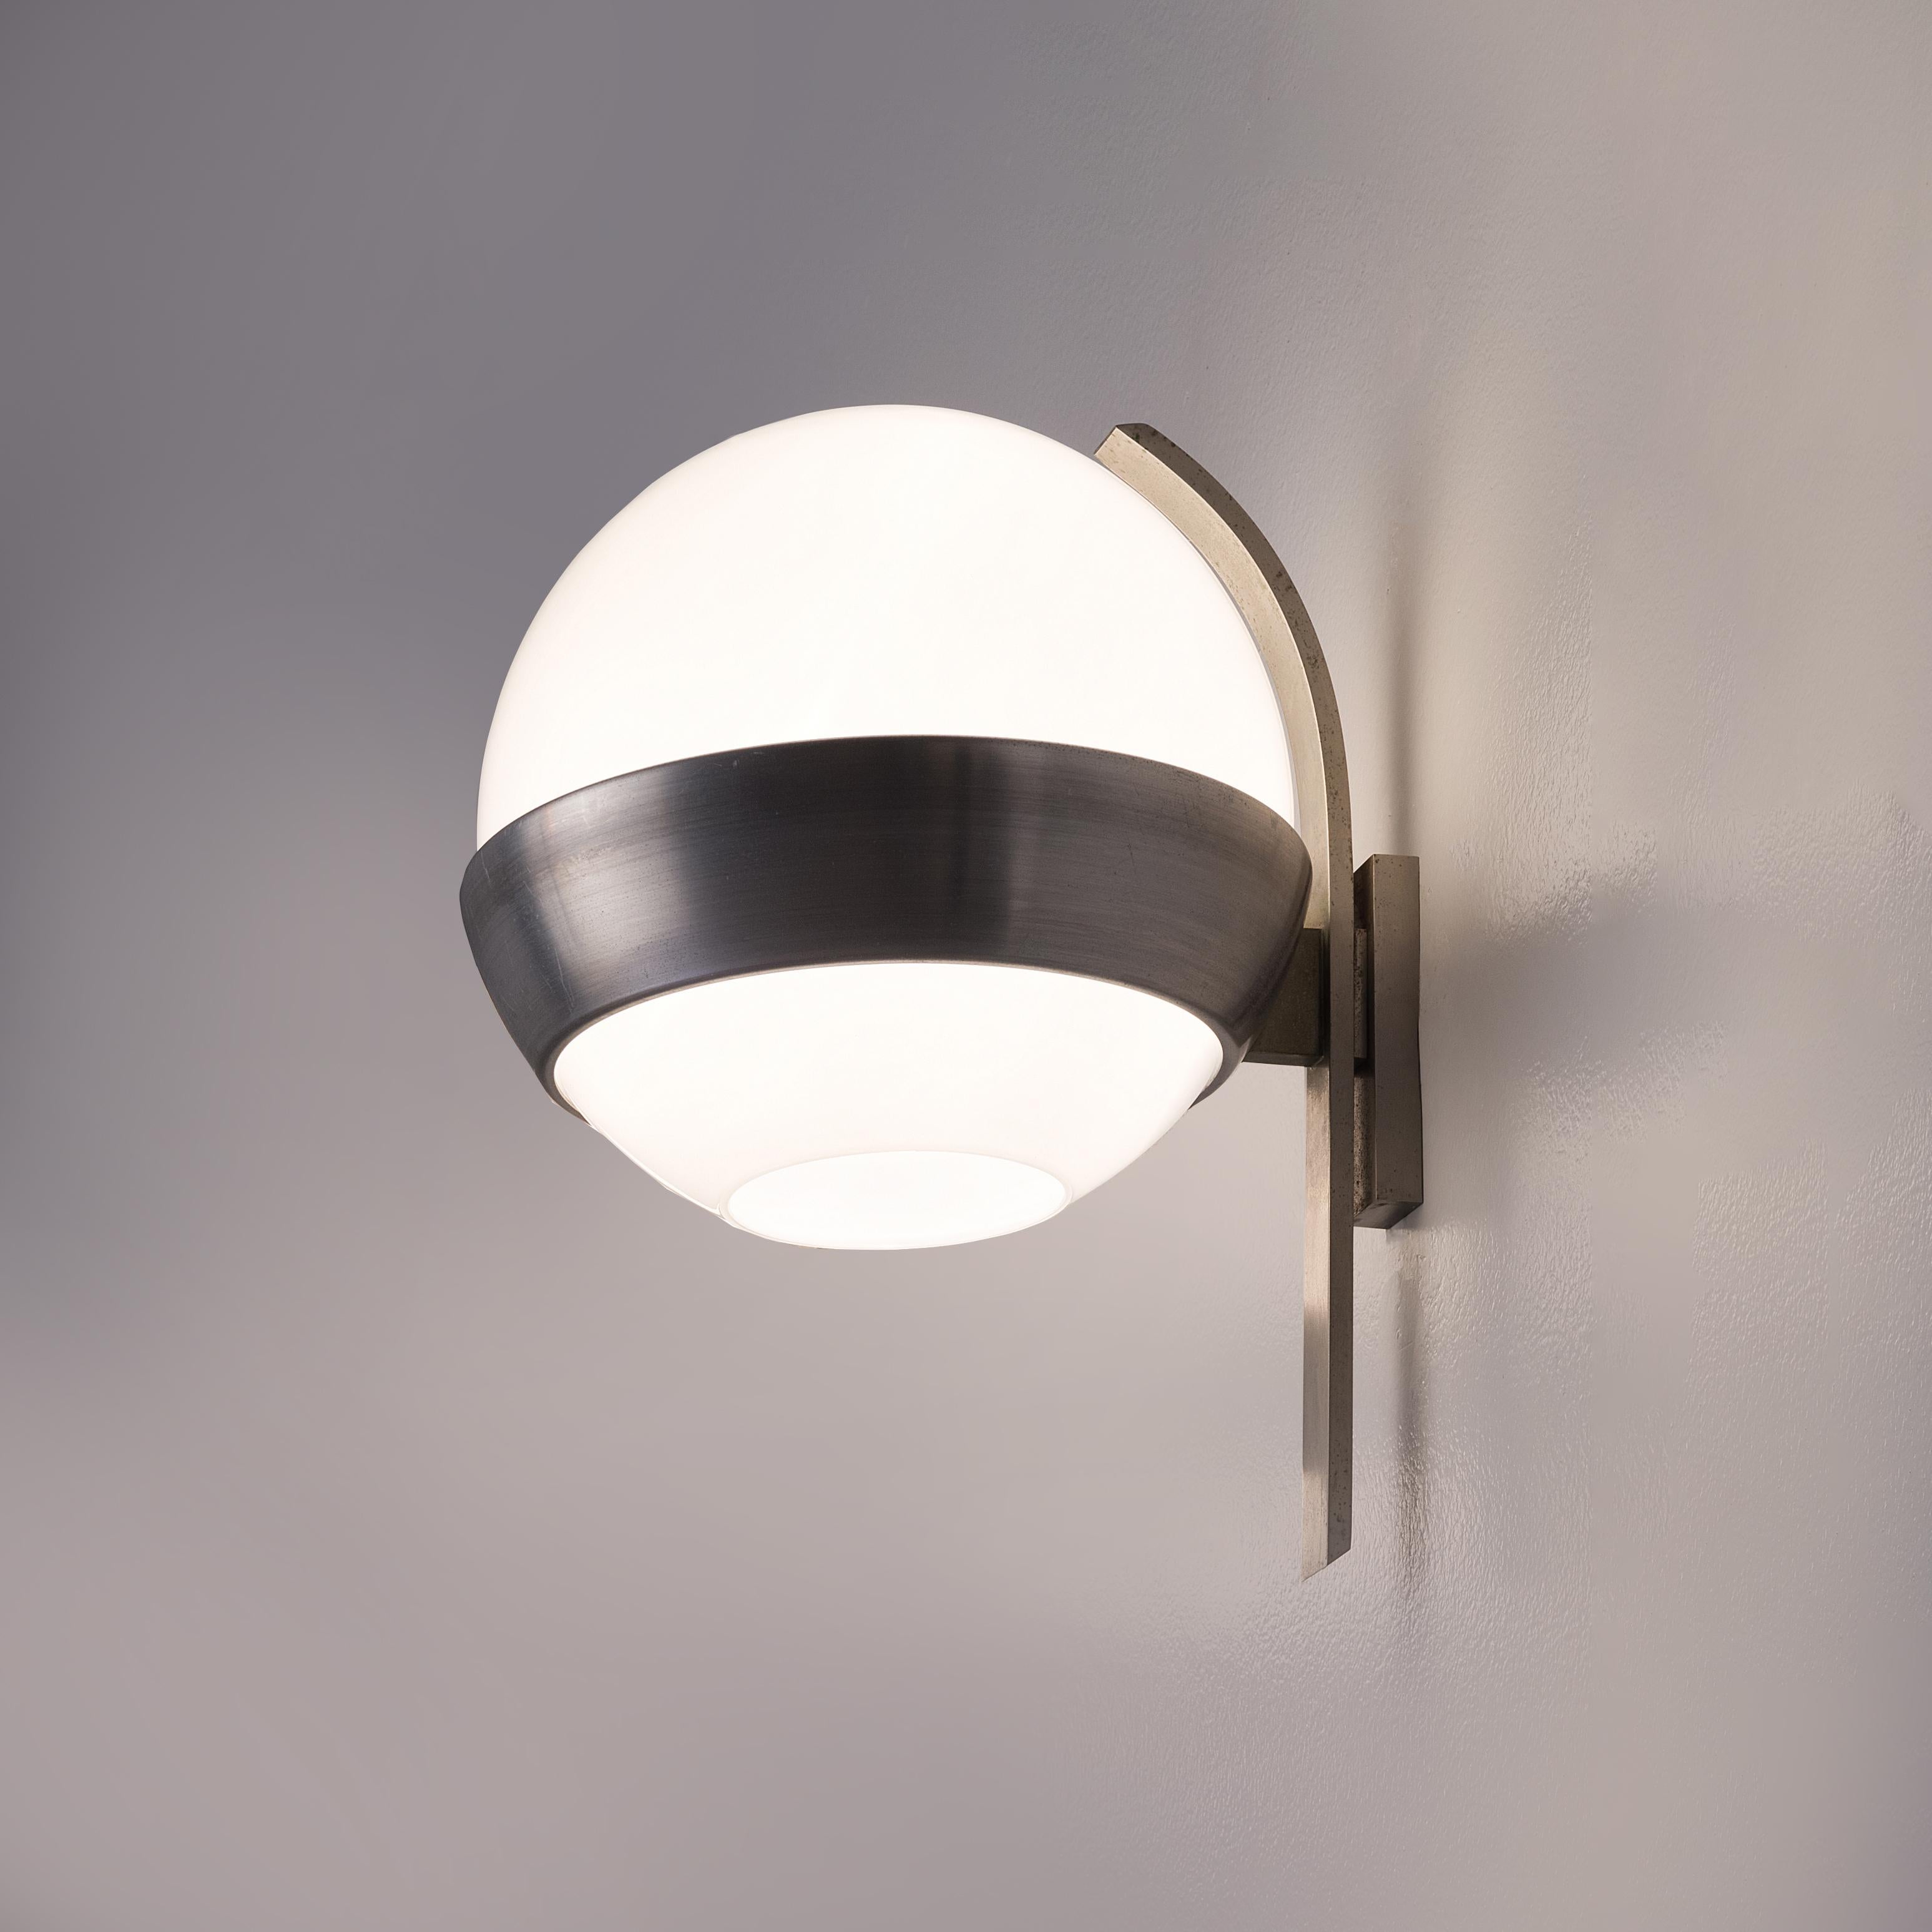 Lumi Milano, wall light model 884, aluminum, glass, Italy, 1970s. 

This stunning wall light is made by the high-end production company Lumi in Milan. The light is wonderfully minimalistic and sober in their design and the metal forms a beautiful